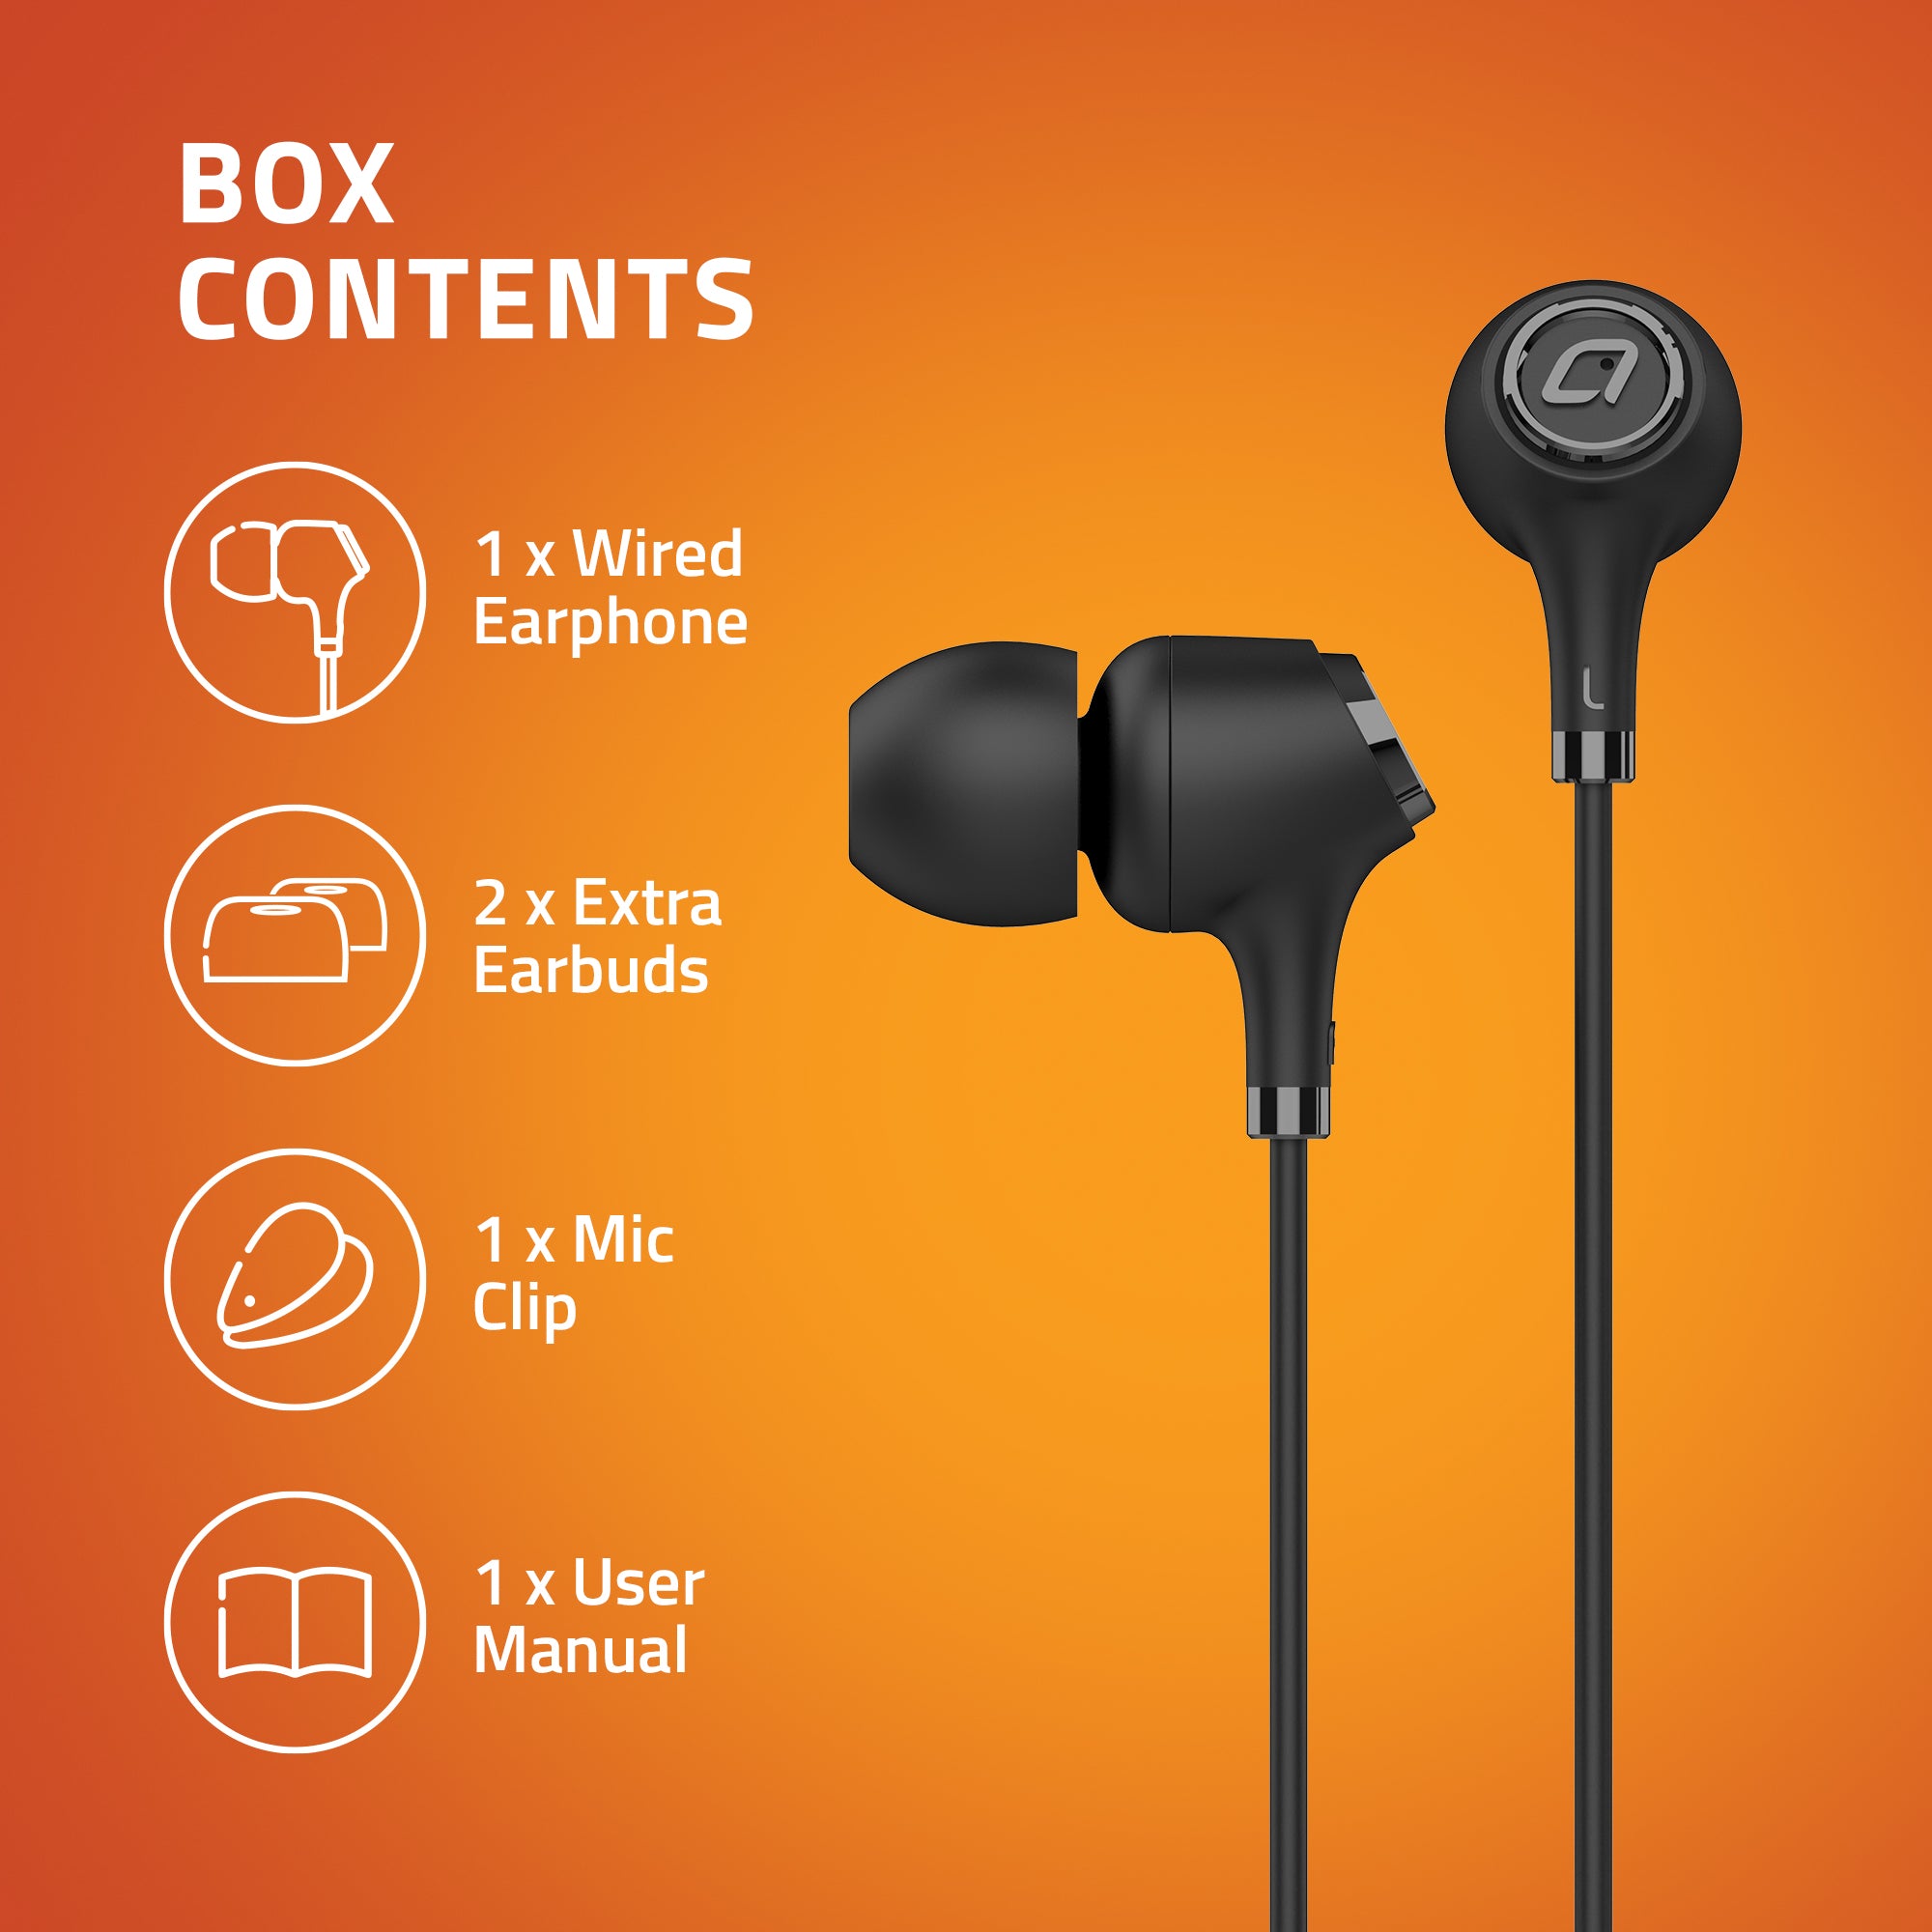 E500M In-Ear Wired Earphones With Mic